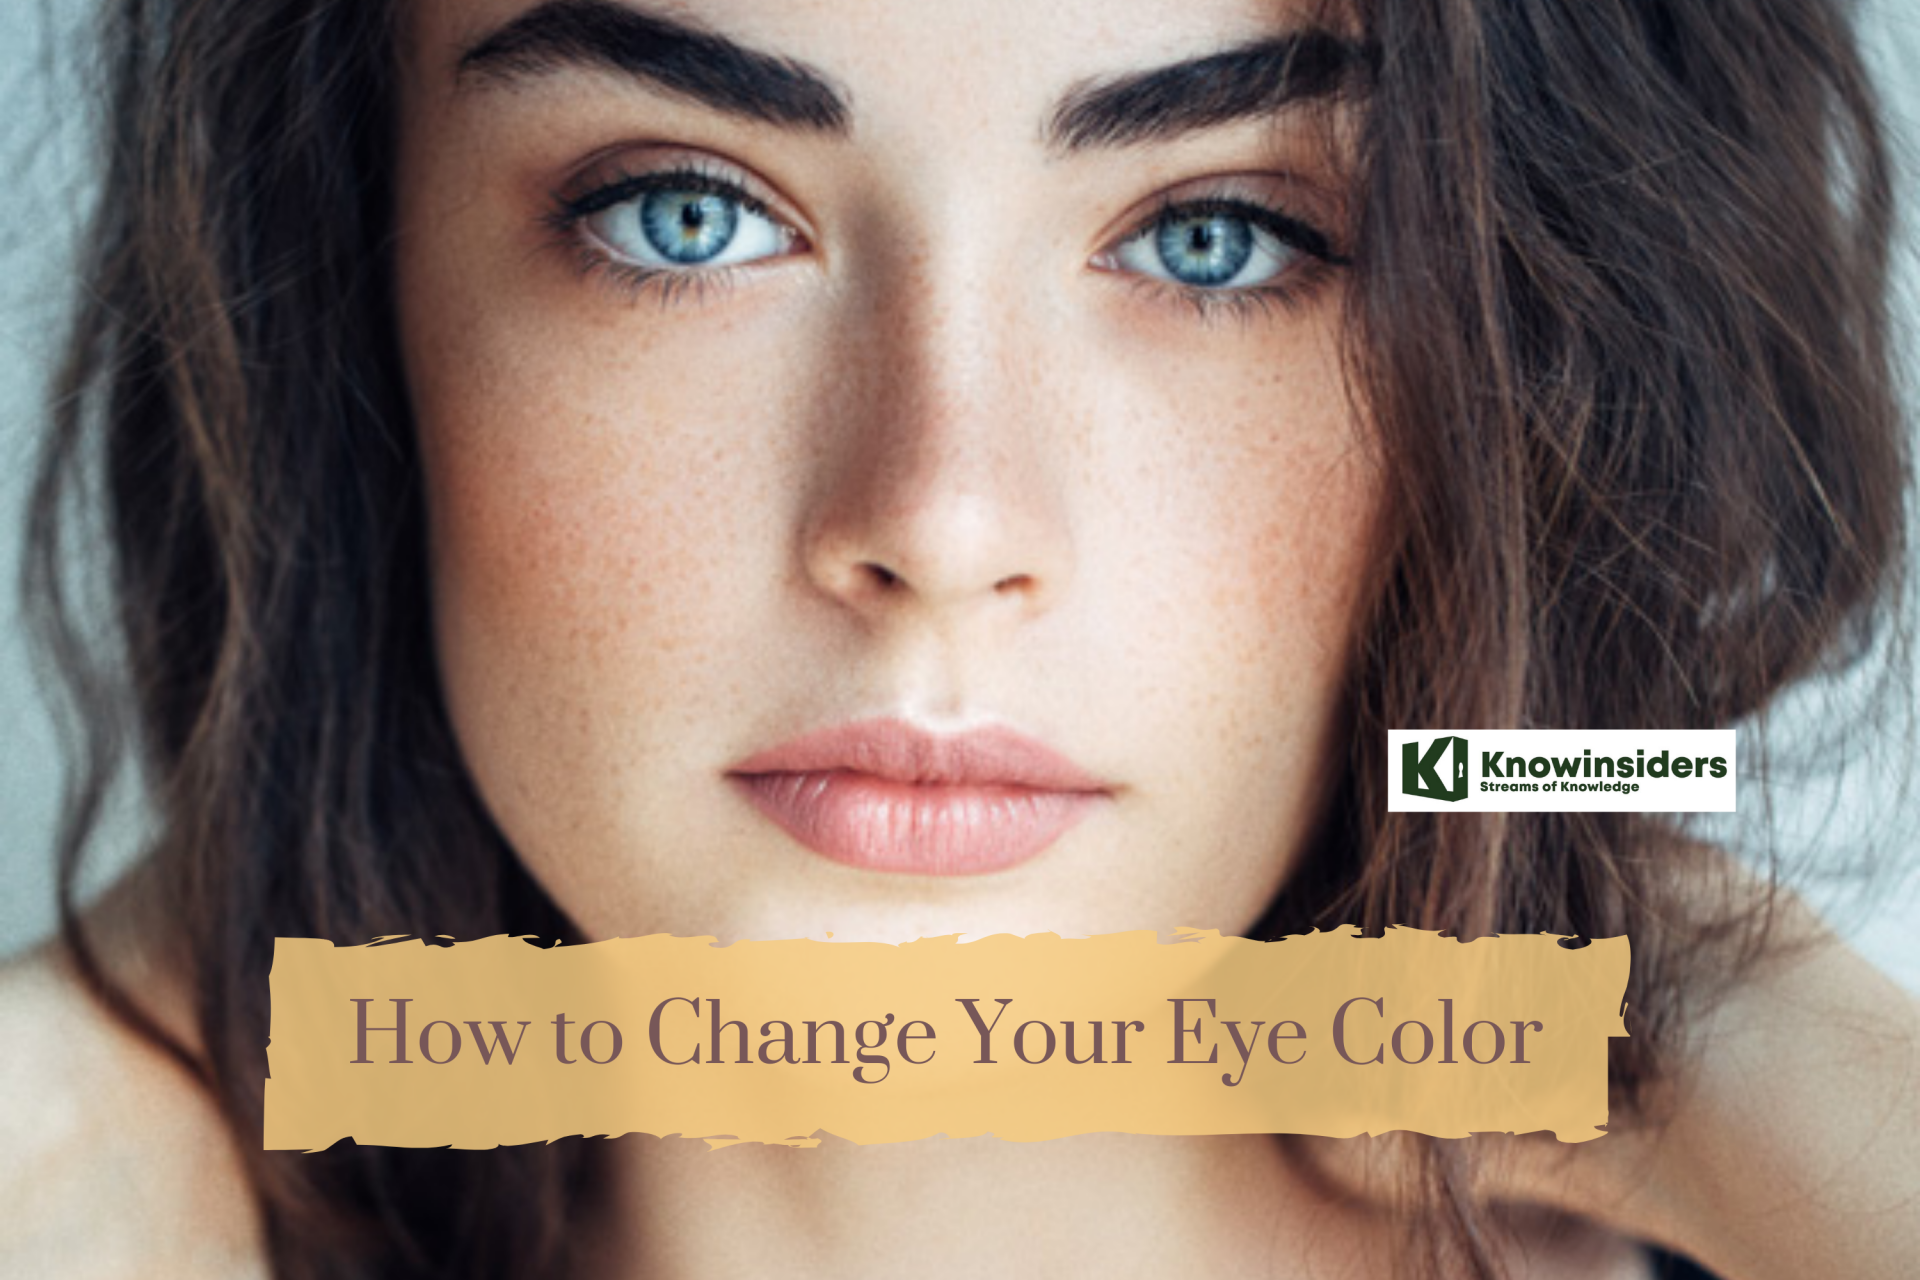 how to change eye color naturally make up or hypnosis